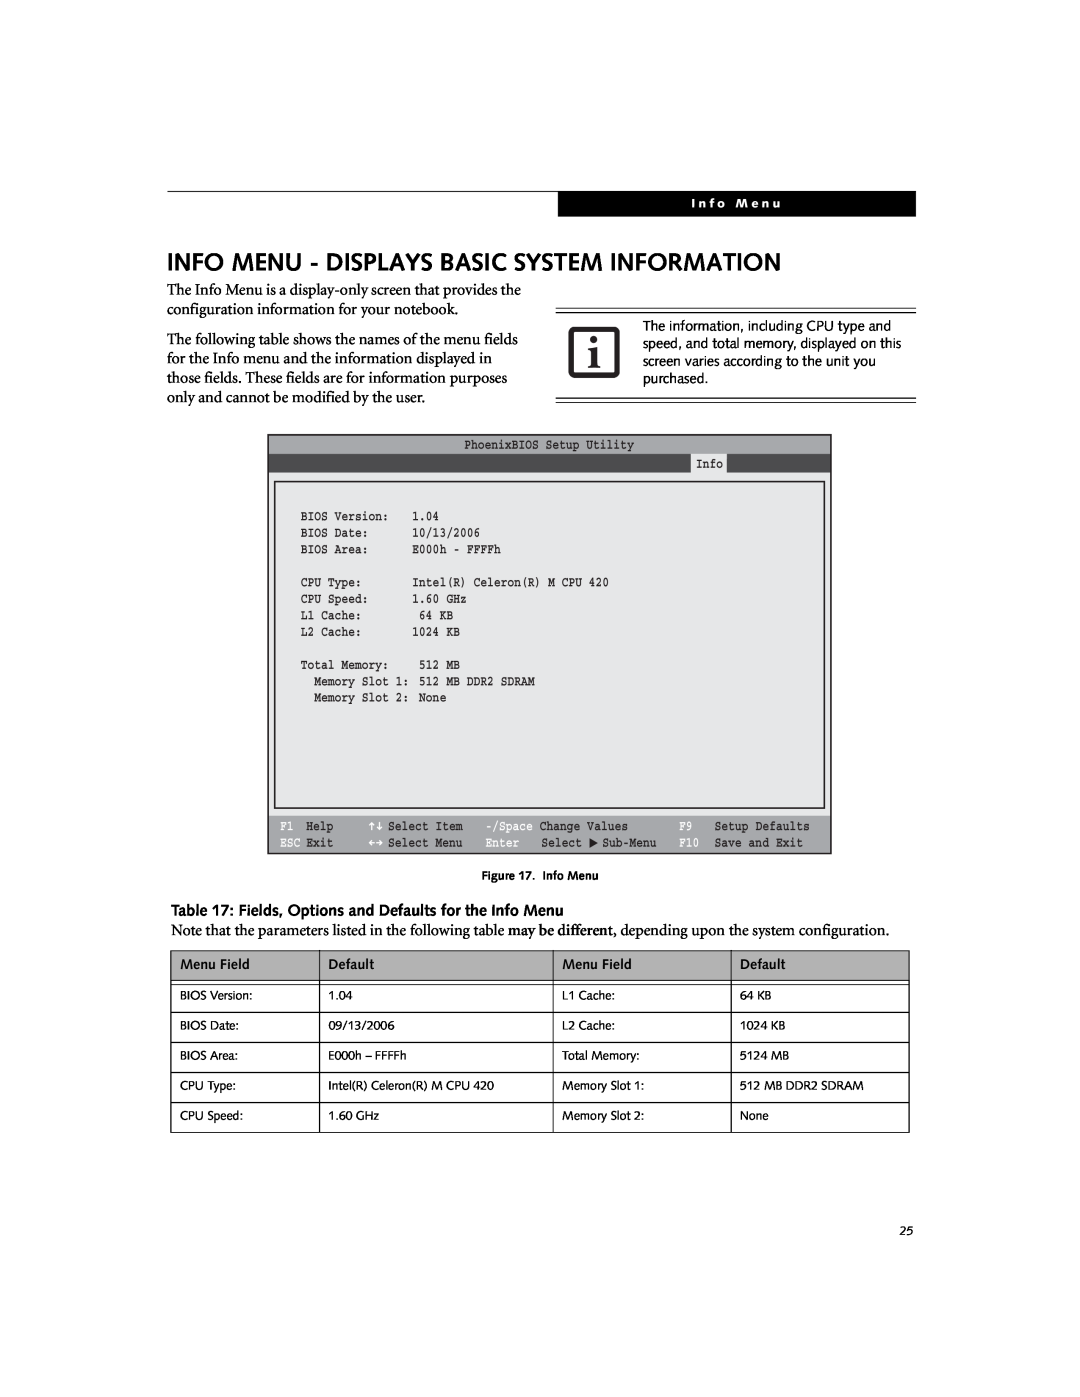 Fujitsu A6010 manual Info Menu - Displays Basic System Information, Fields, Options and Defaults for the Info Menu 